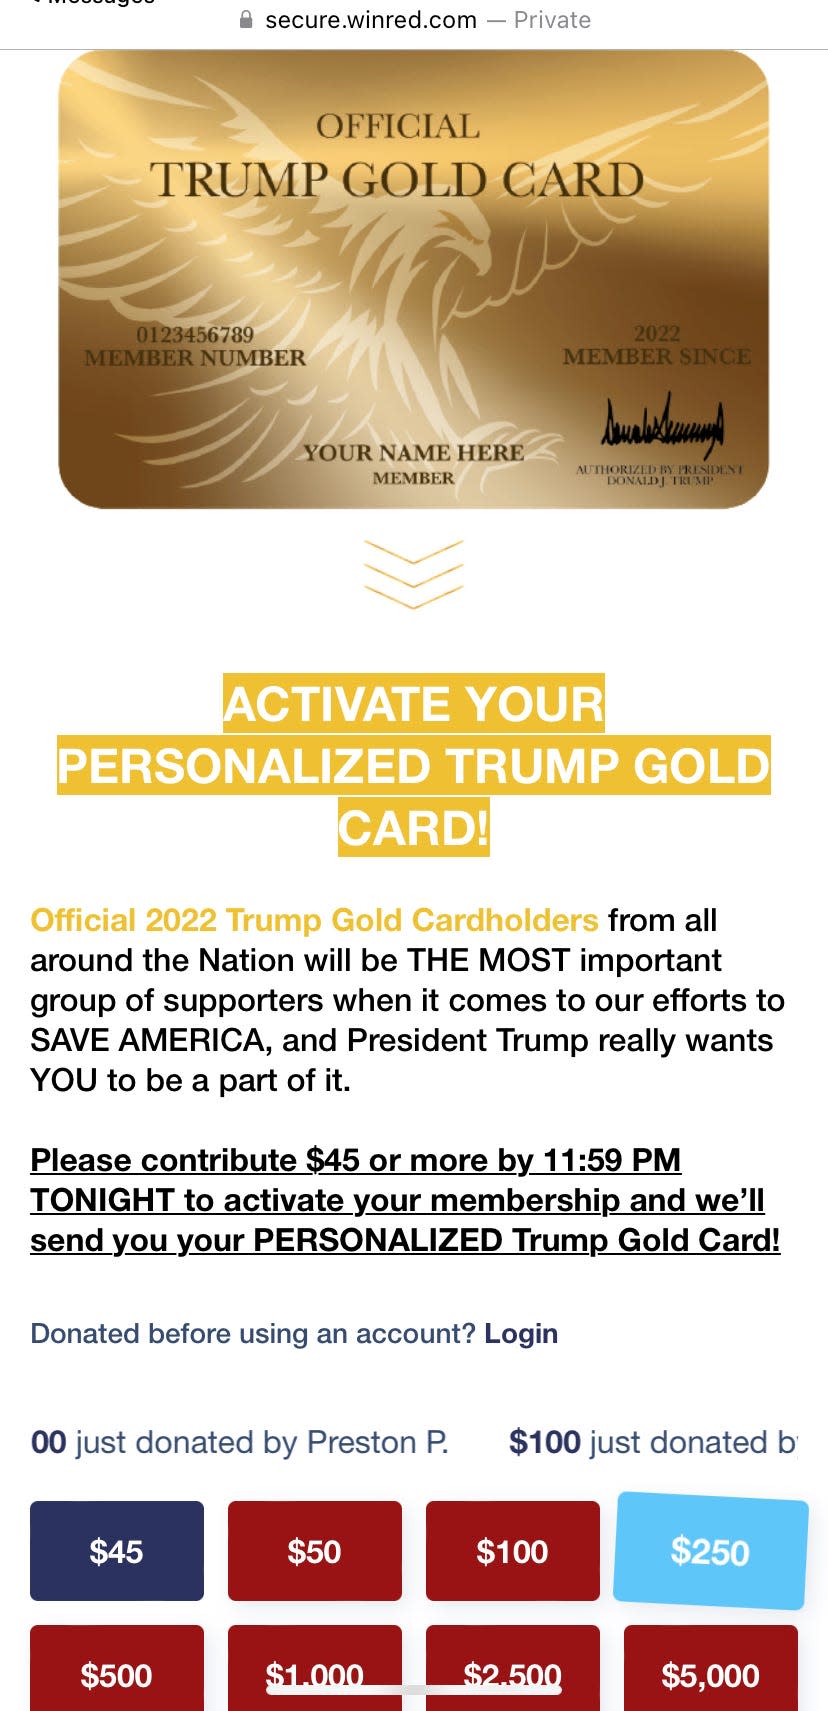 Official Trump Gold Card